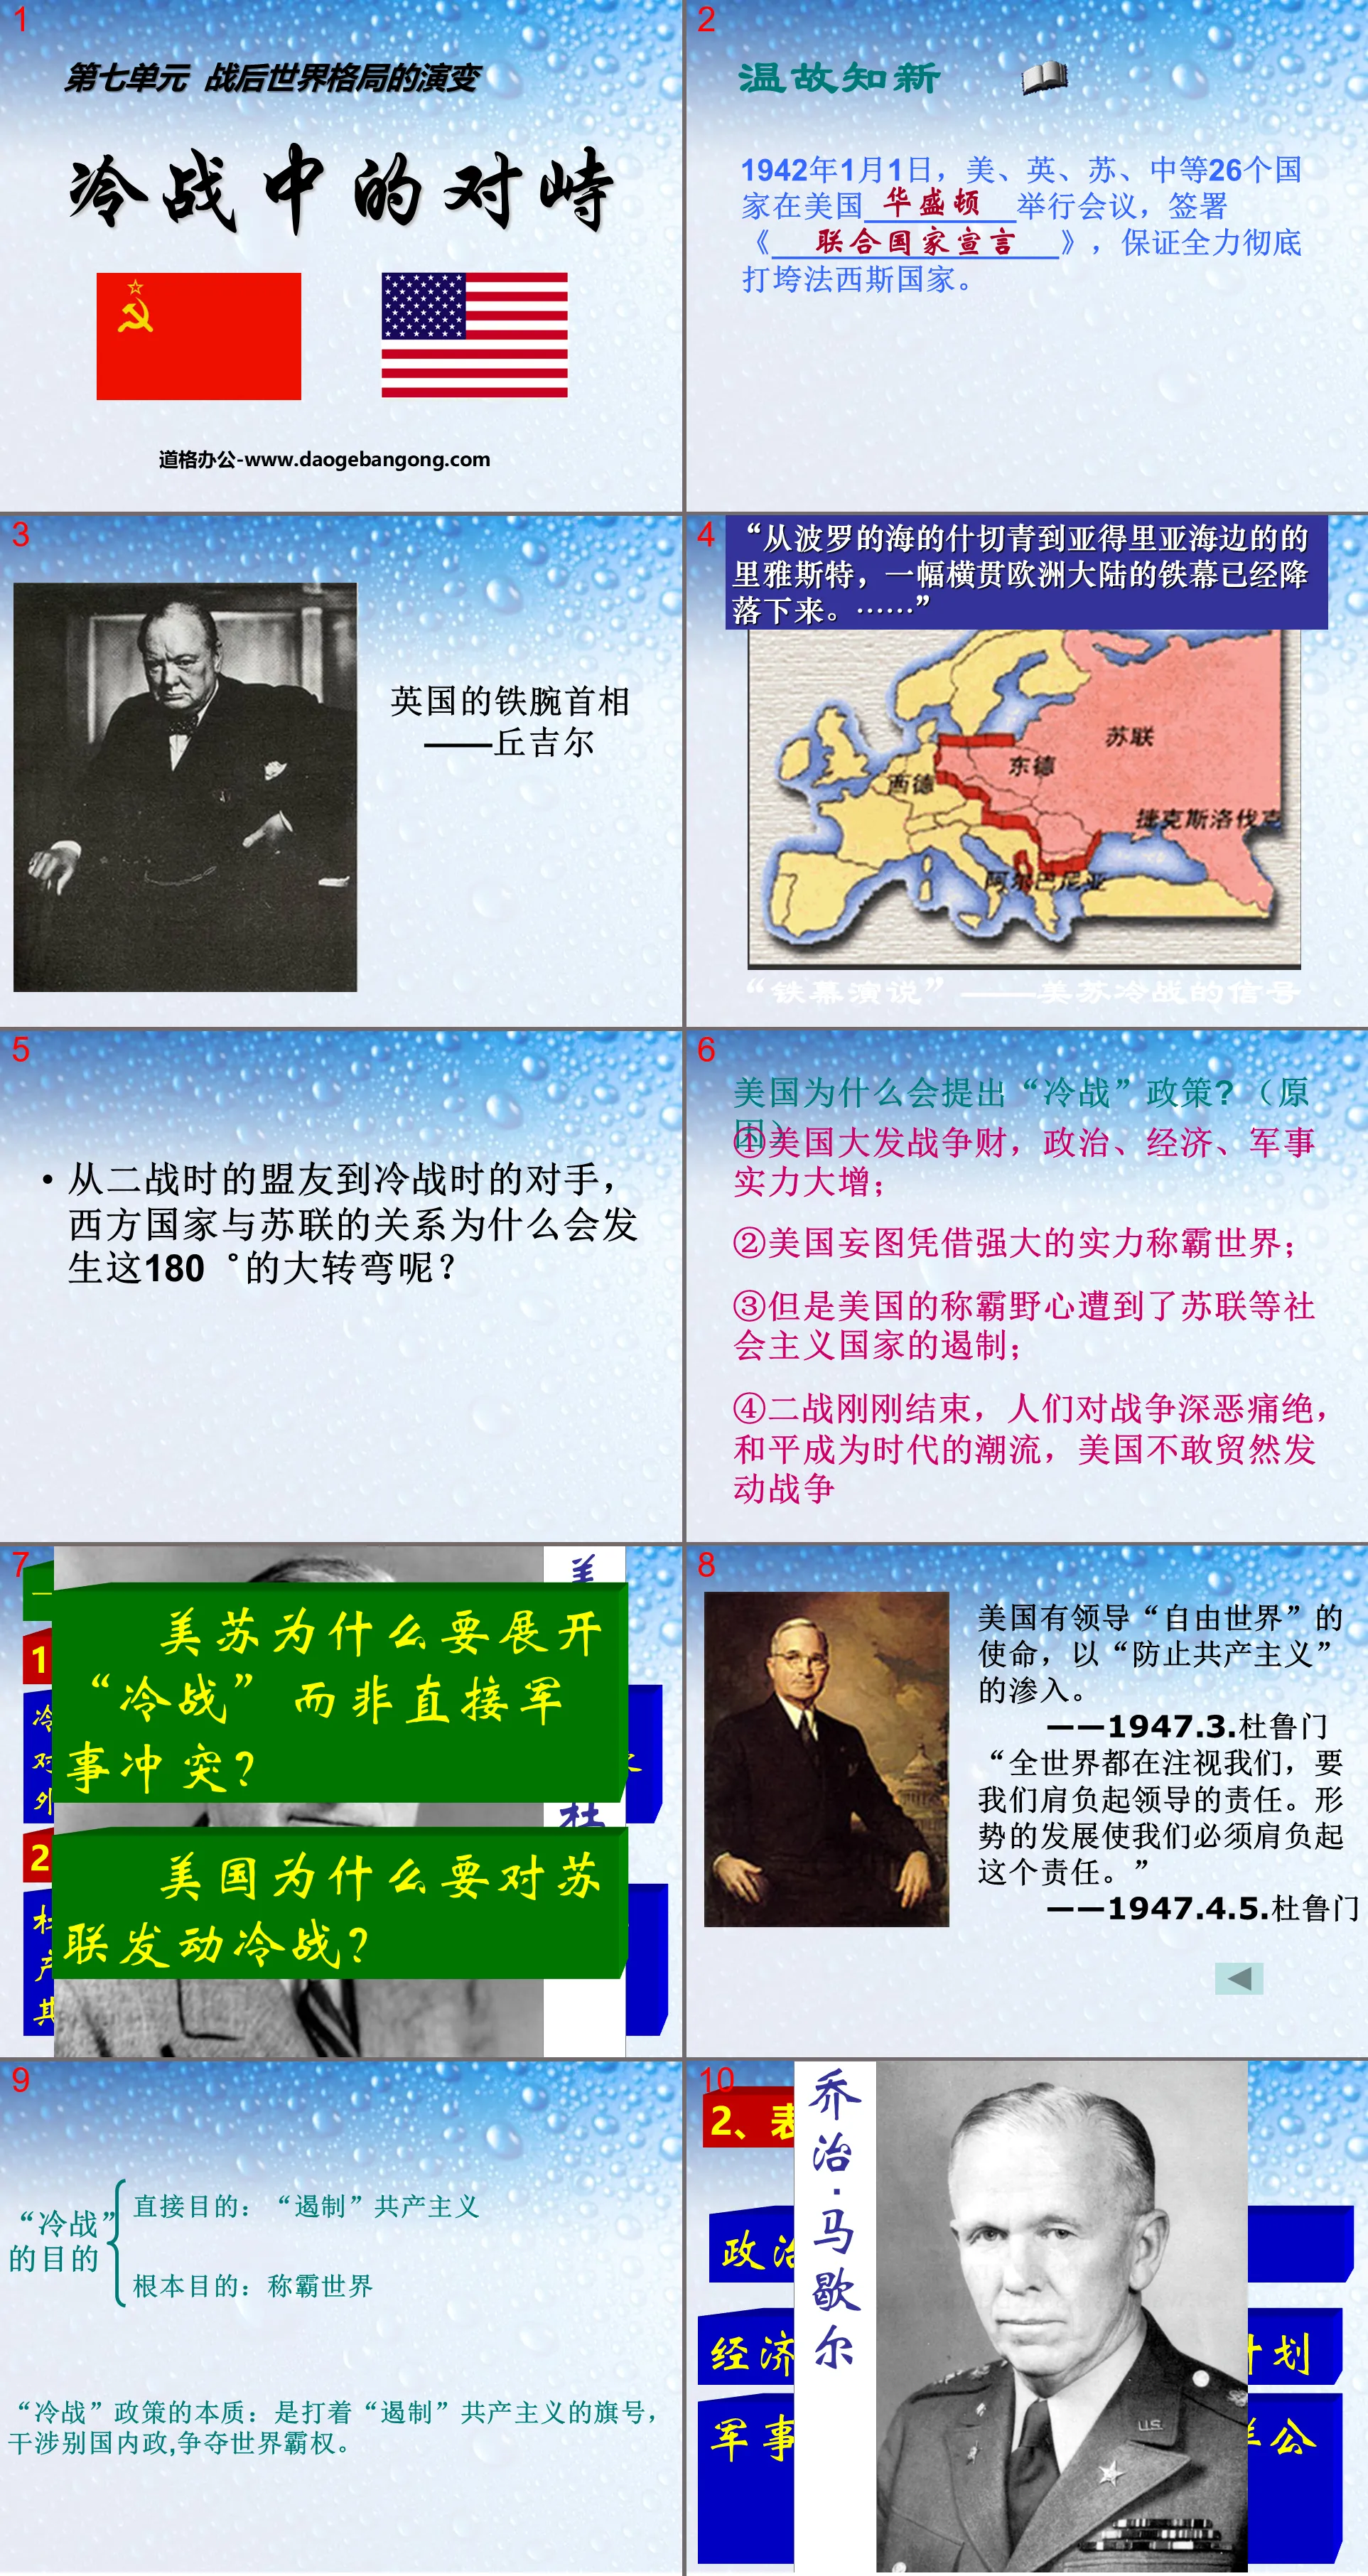 "Confrontation in the Cold War" The evolution of the postwar world pattern PPT courseware 5